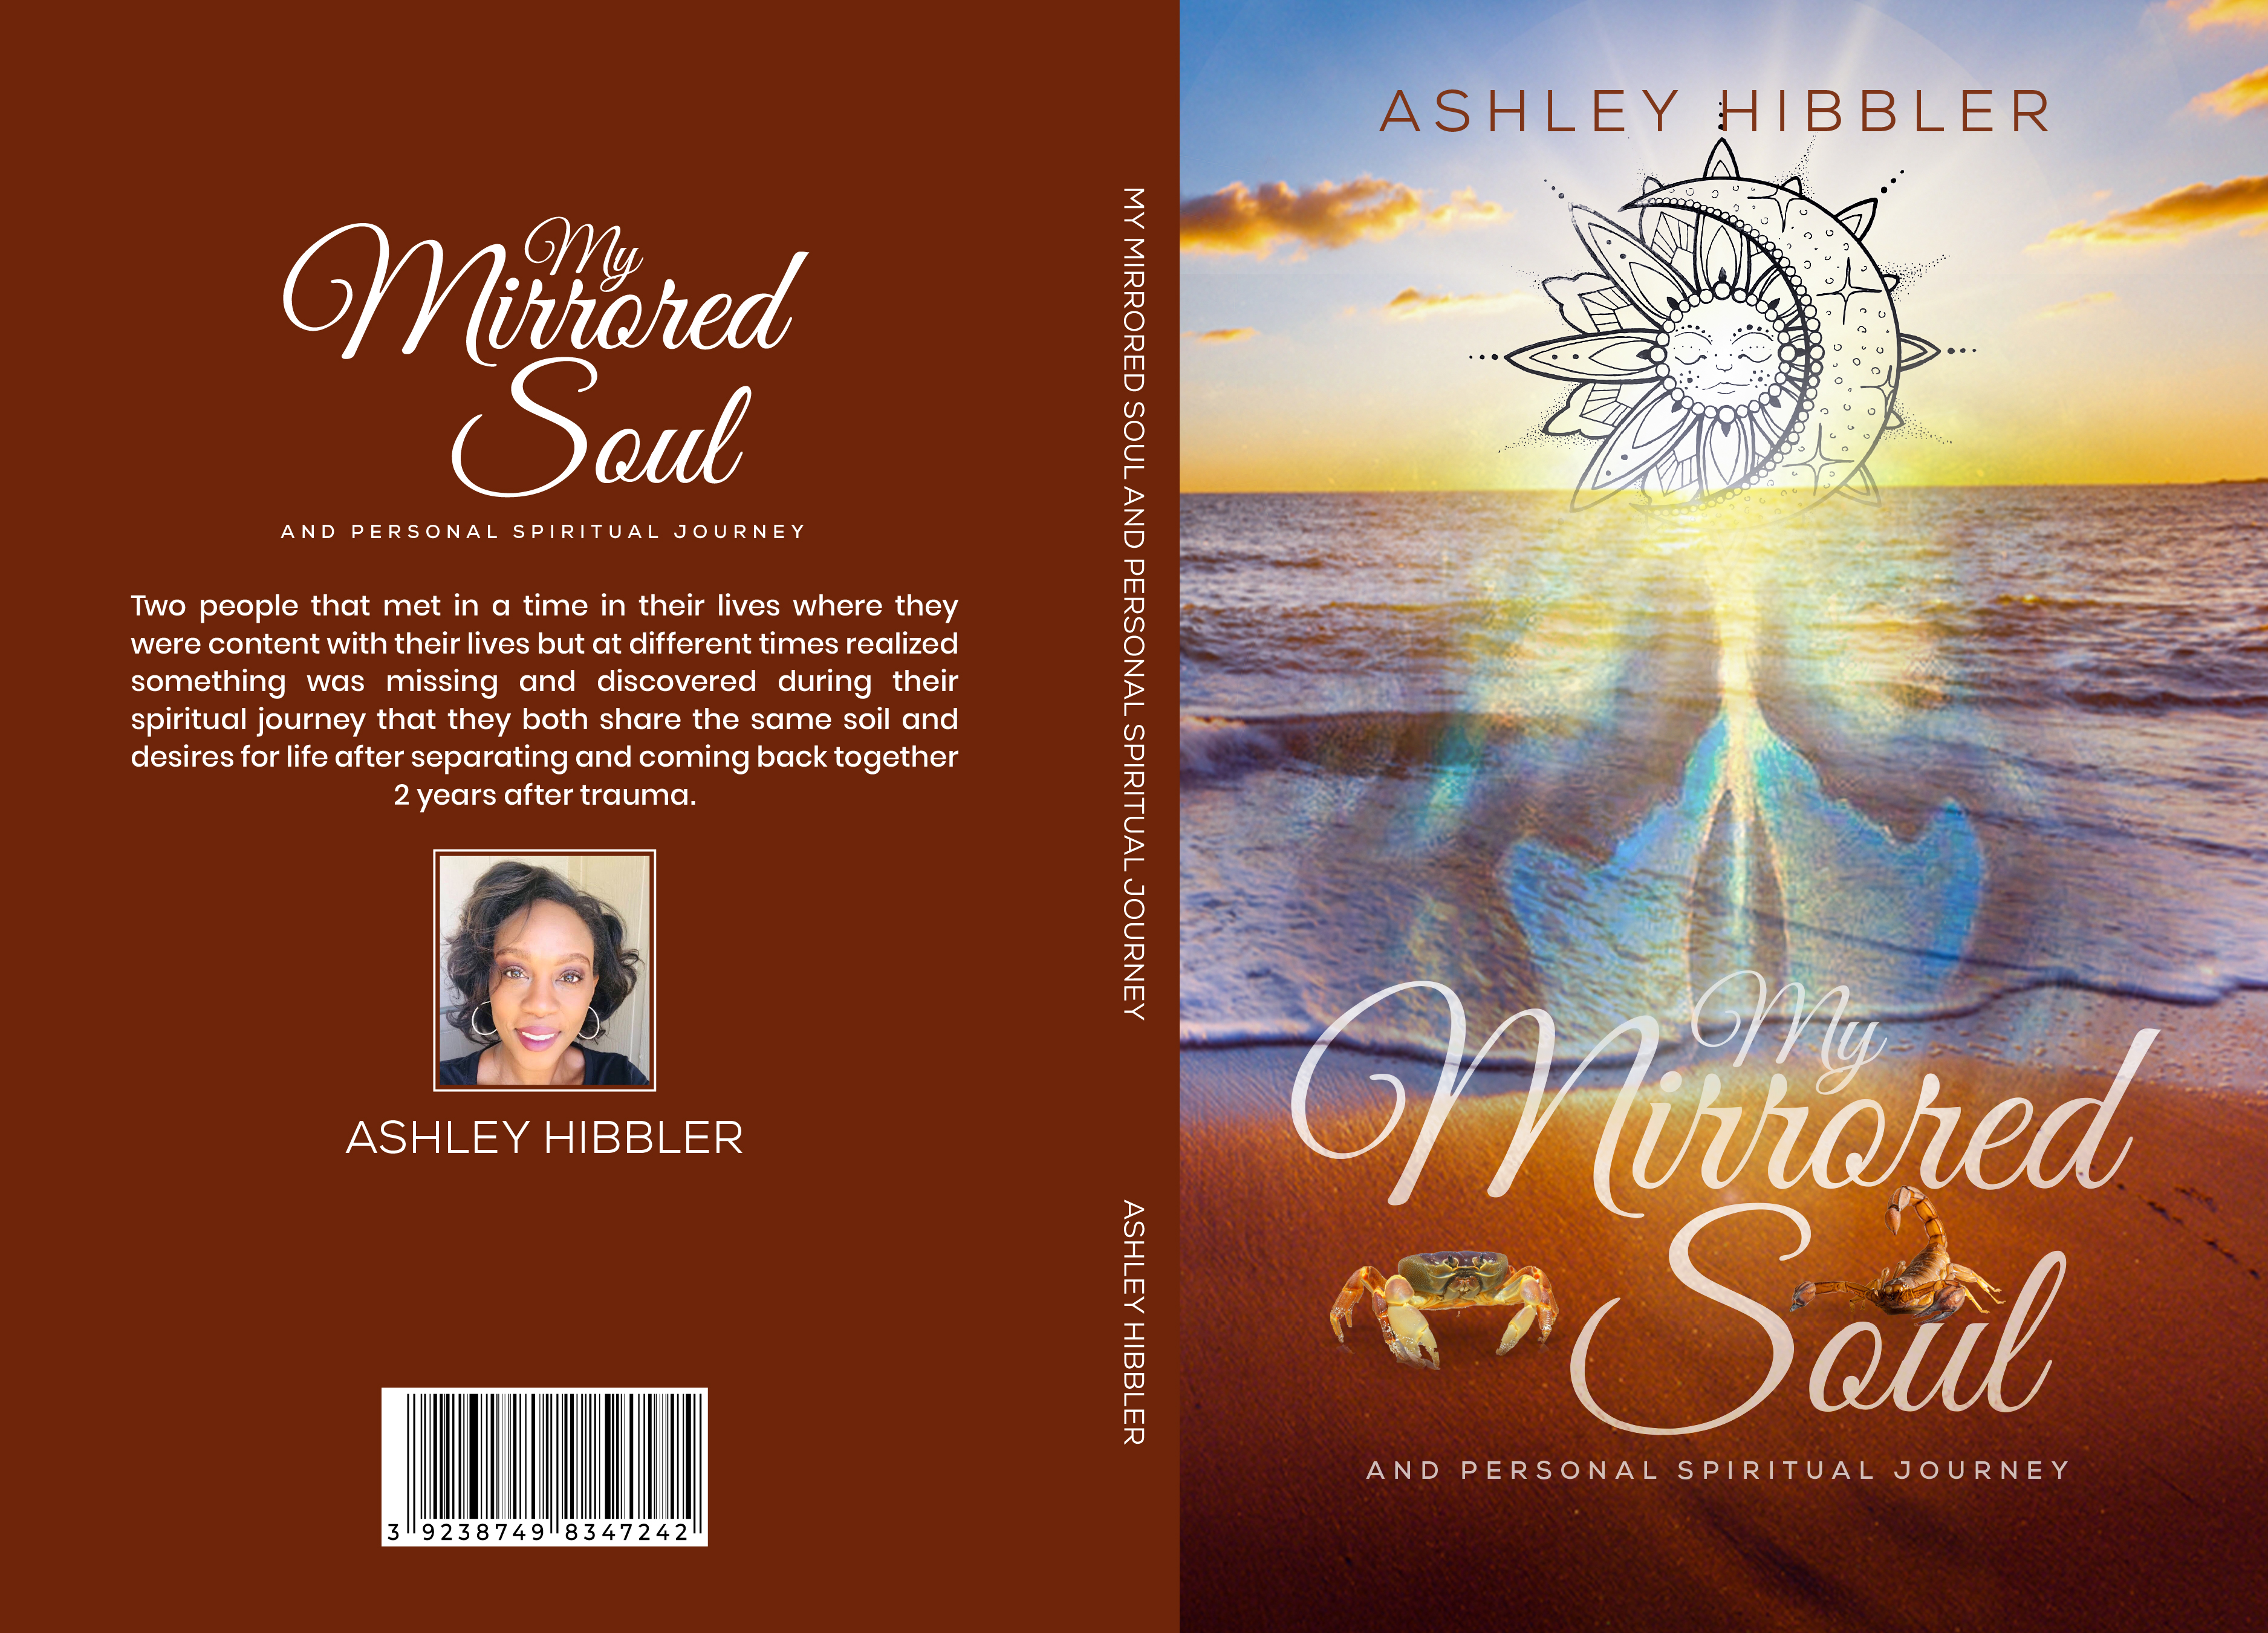 From the Experiences of Ashley Hibbler Comes a Romantic Introspection - My Mirrored Soul and Personal Spiritual Journey is Available Now